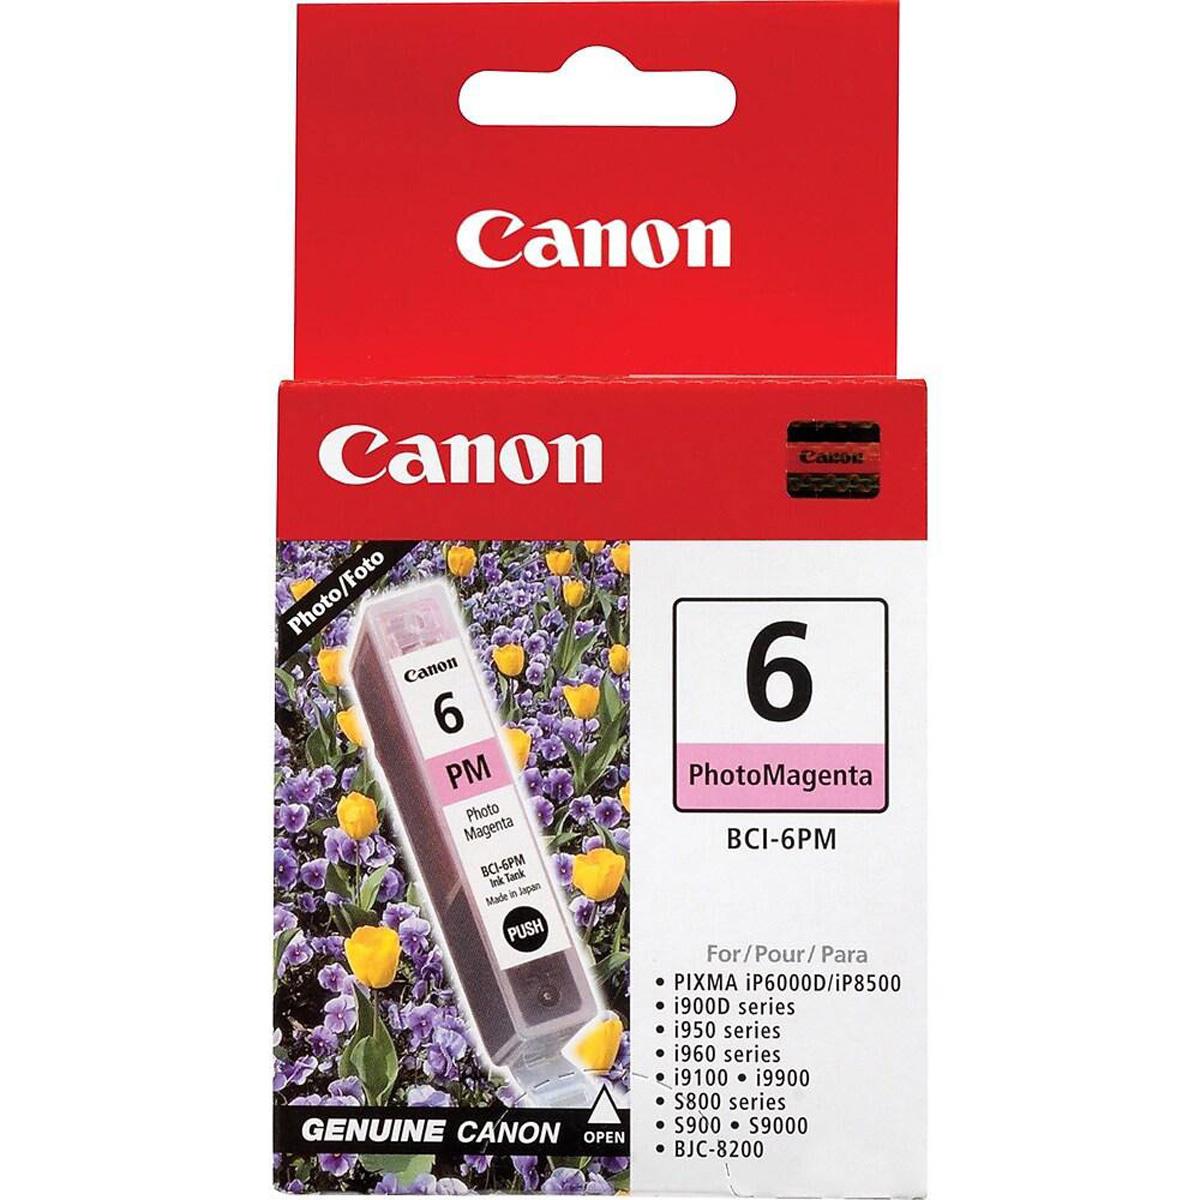 Image of Canon BCI-6PM Photo Magenta Ink Tank for Select PIXMA iP